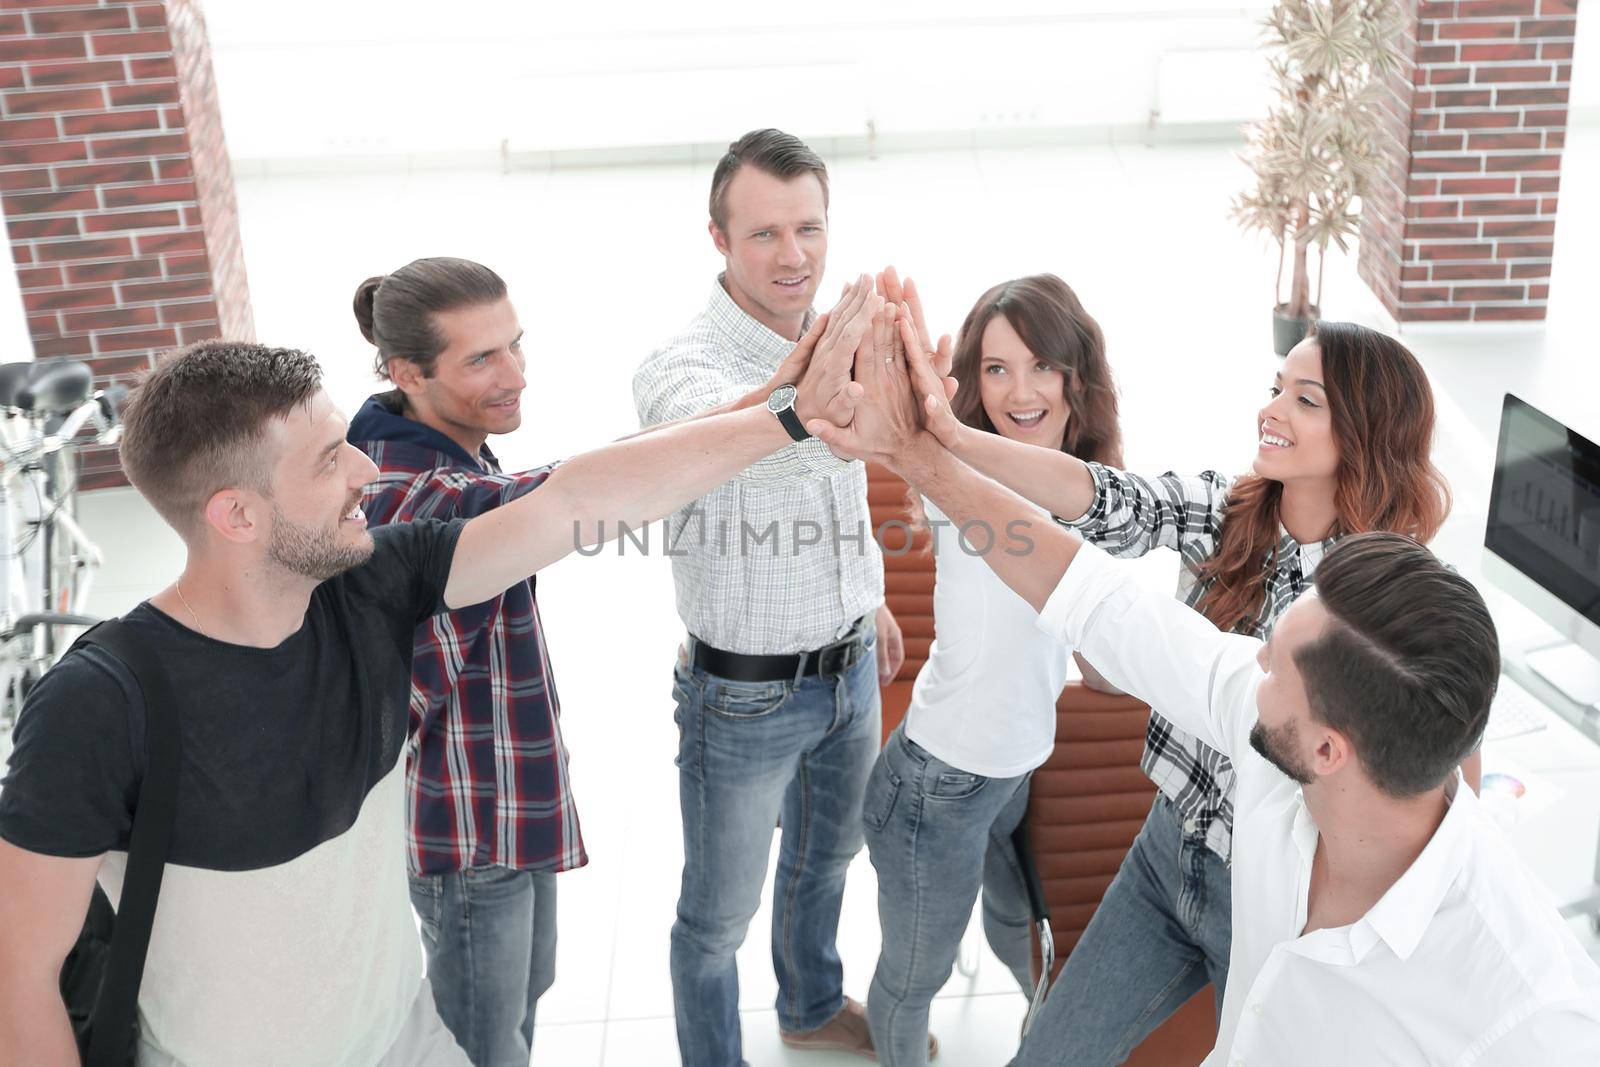 design team giving each other a high five.the concept of teamwork